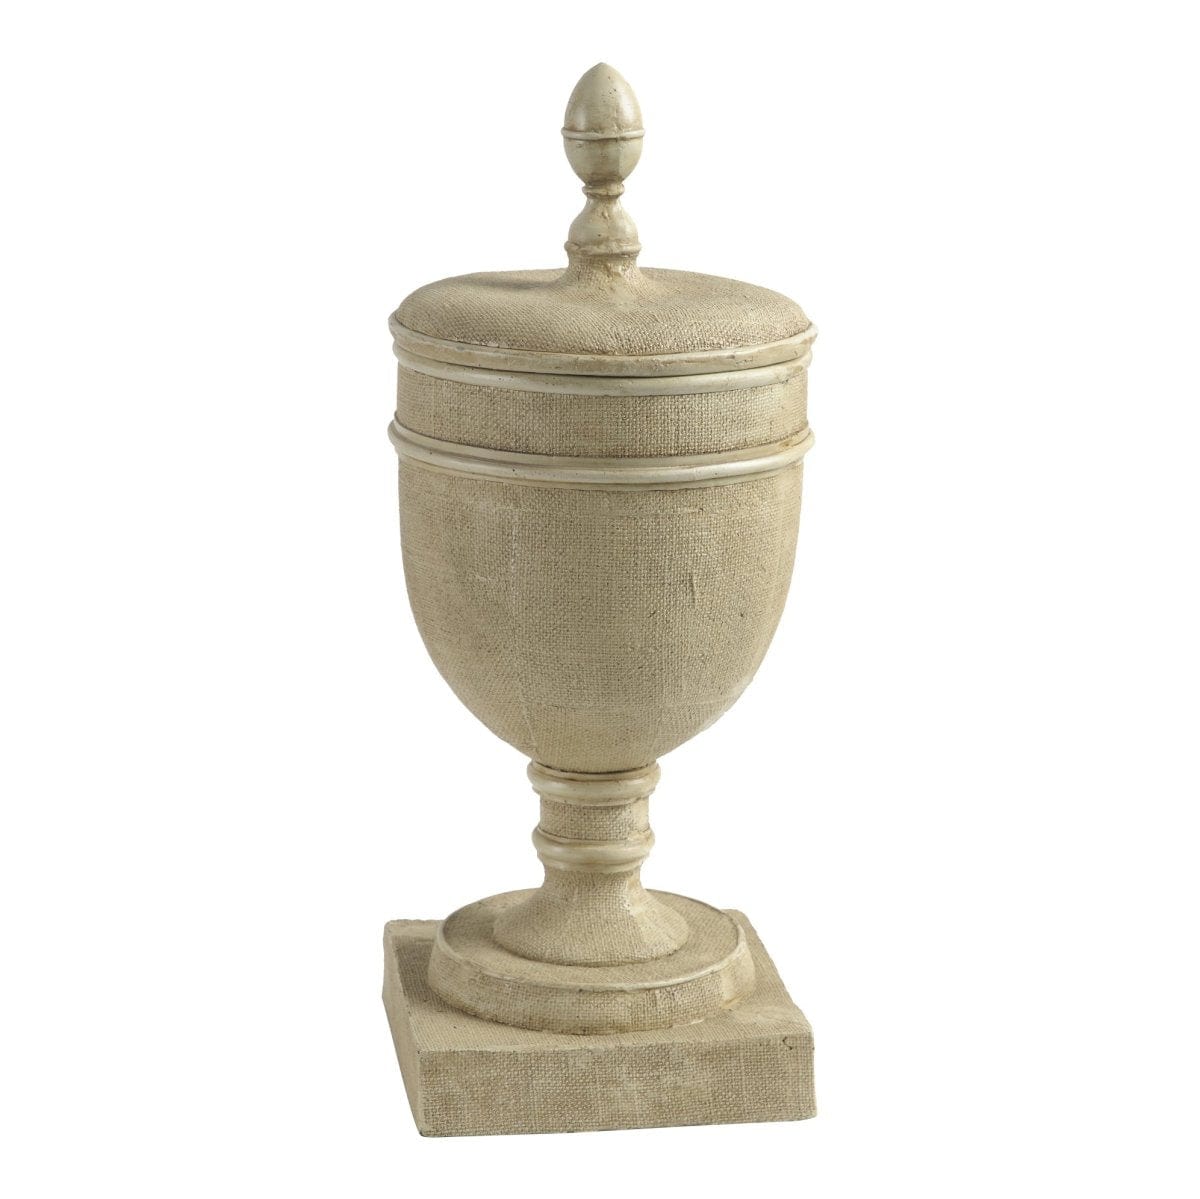 AB-73462 Chester Pedestal Vase with Lid picket and rail